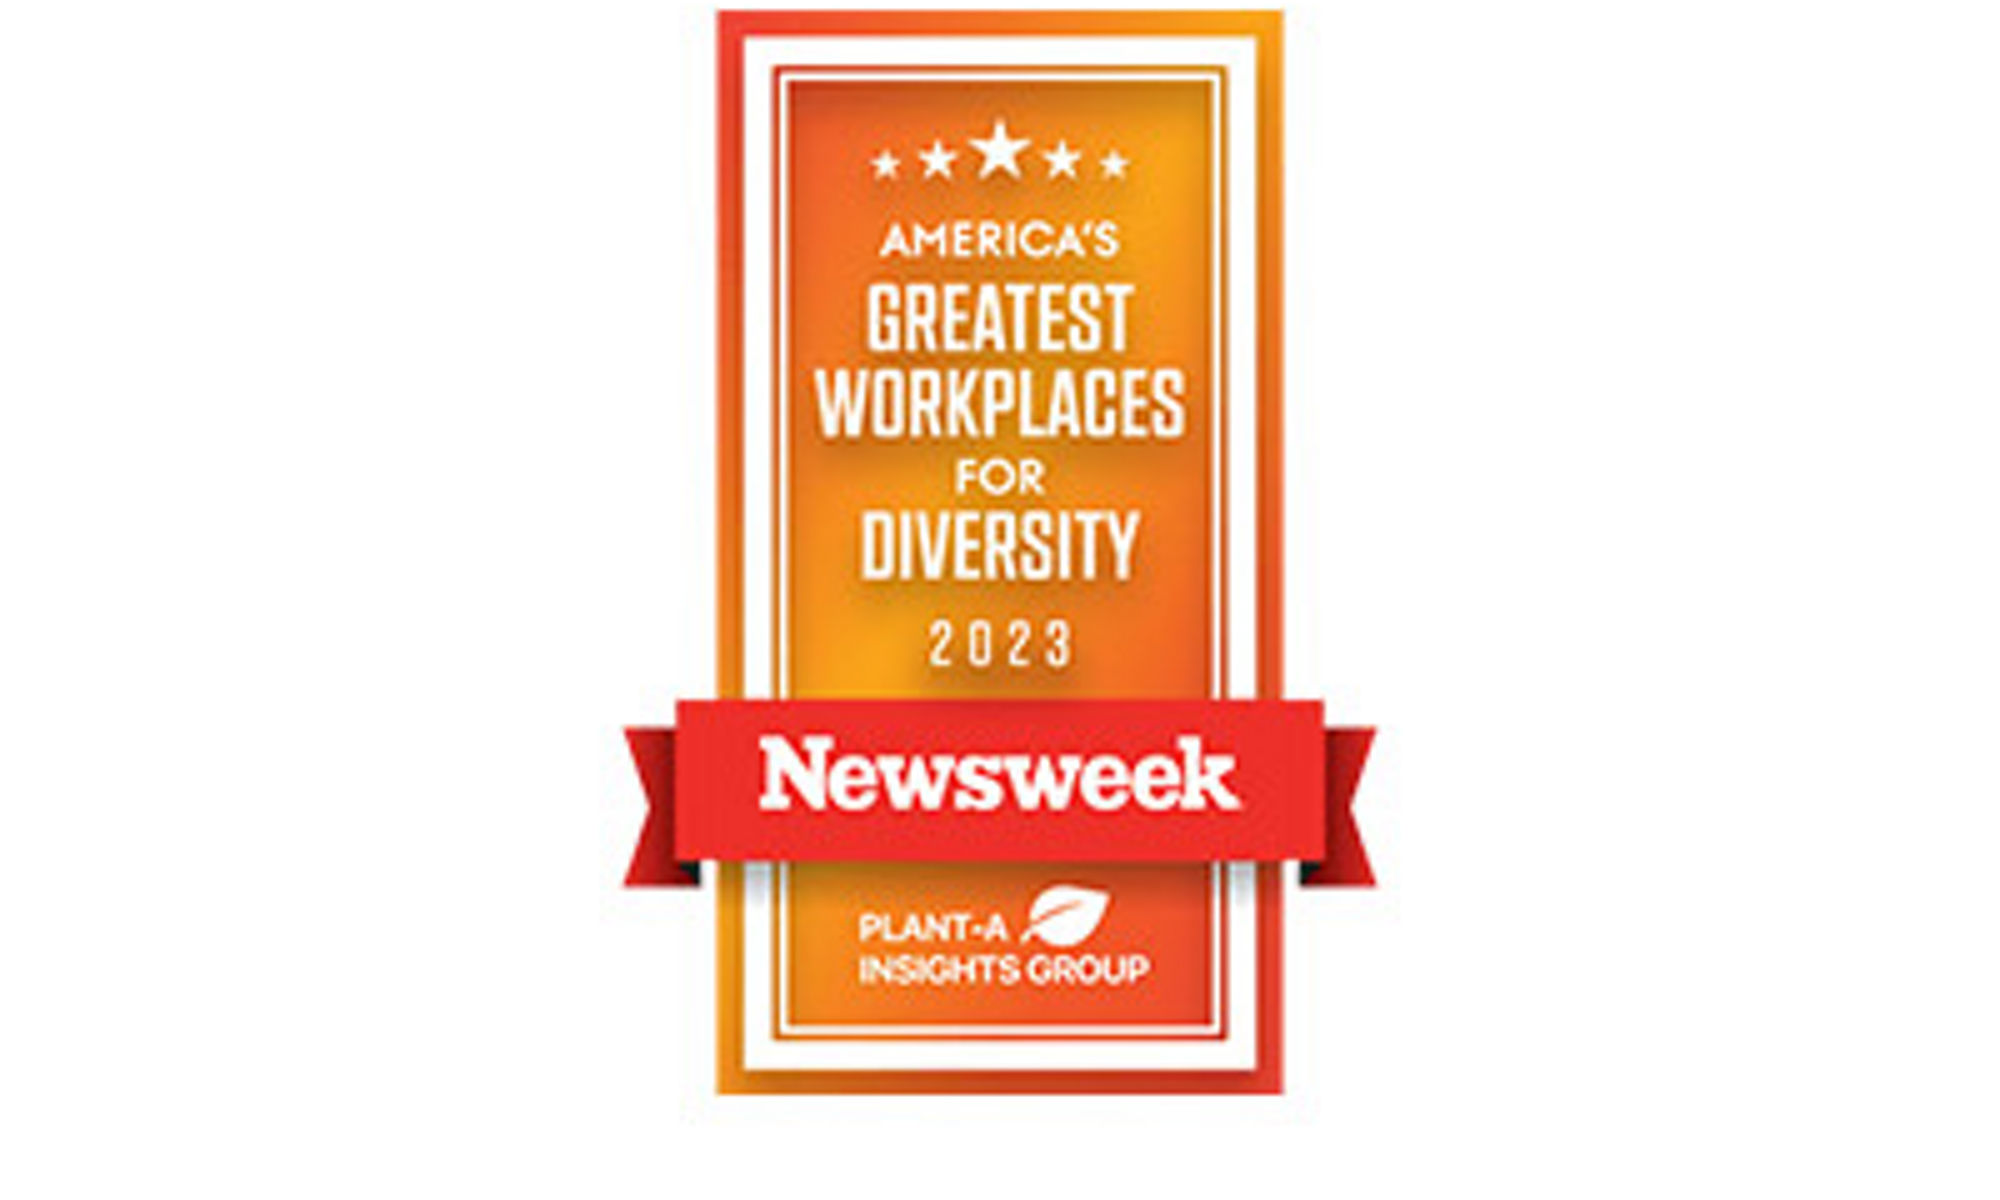 Newsweek America's Greatest Workplaces for Diversity 2023 award icon